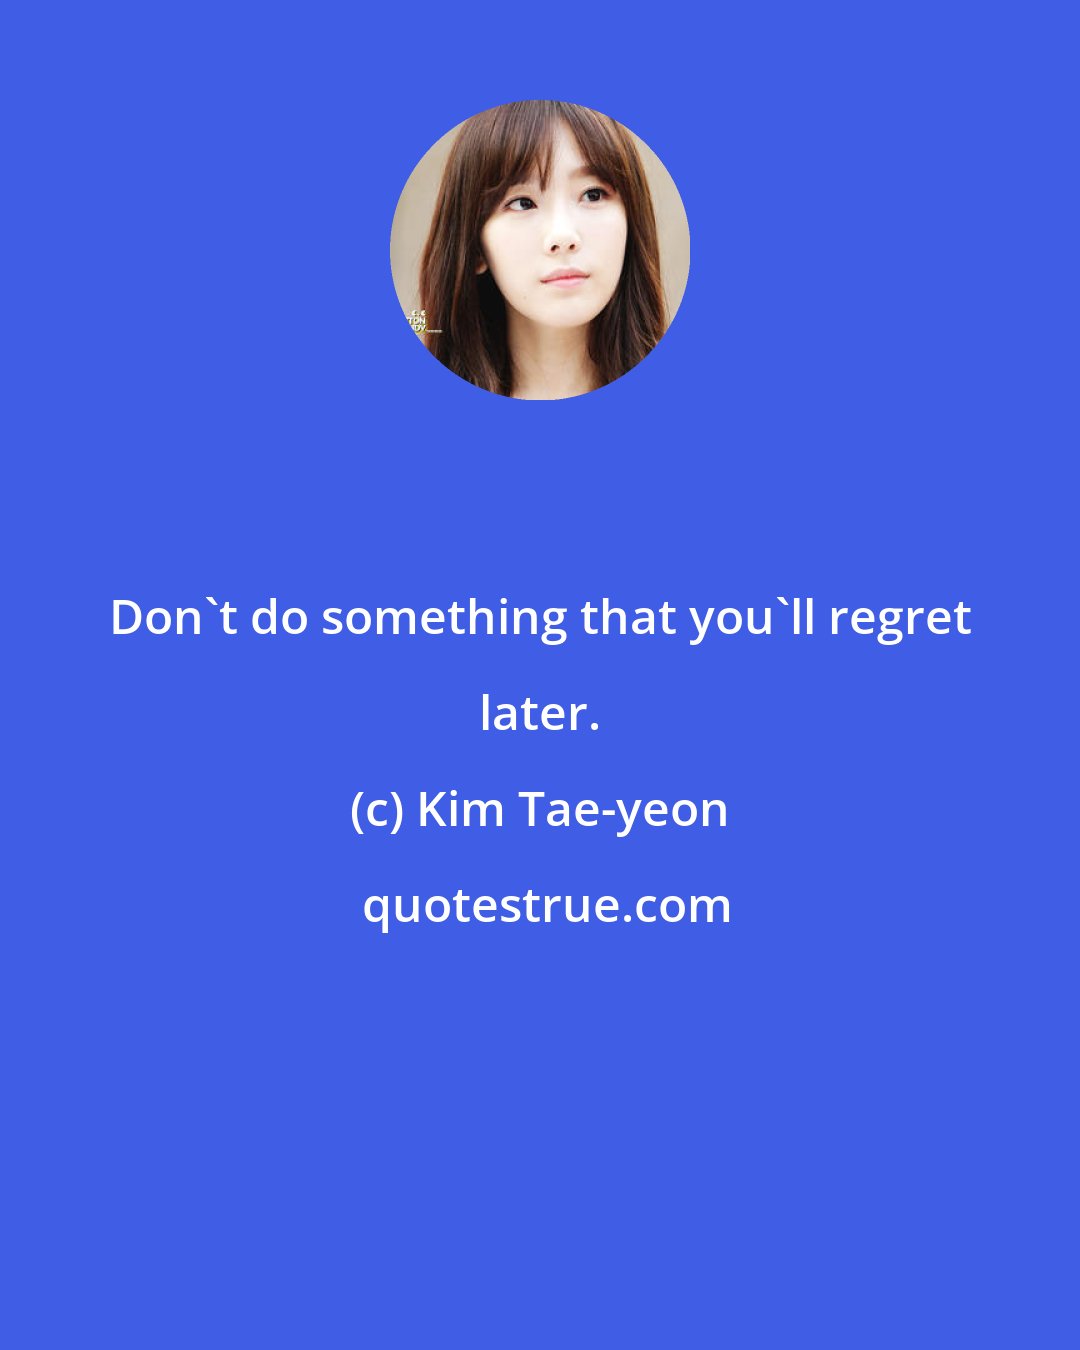 Kim Tae-yeon: Don't do something that you'll regret later.